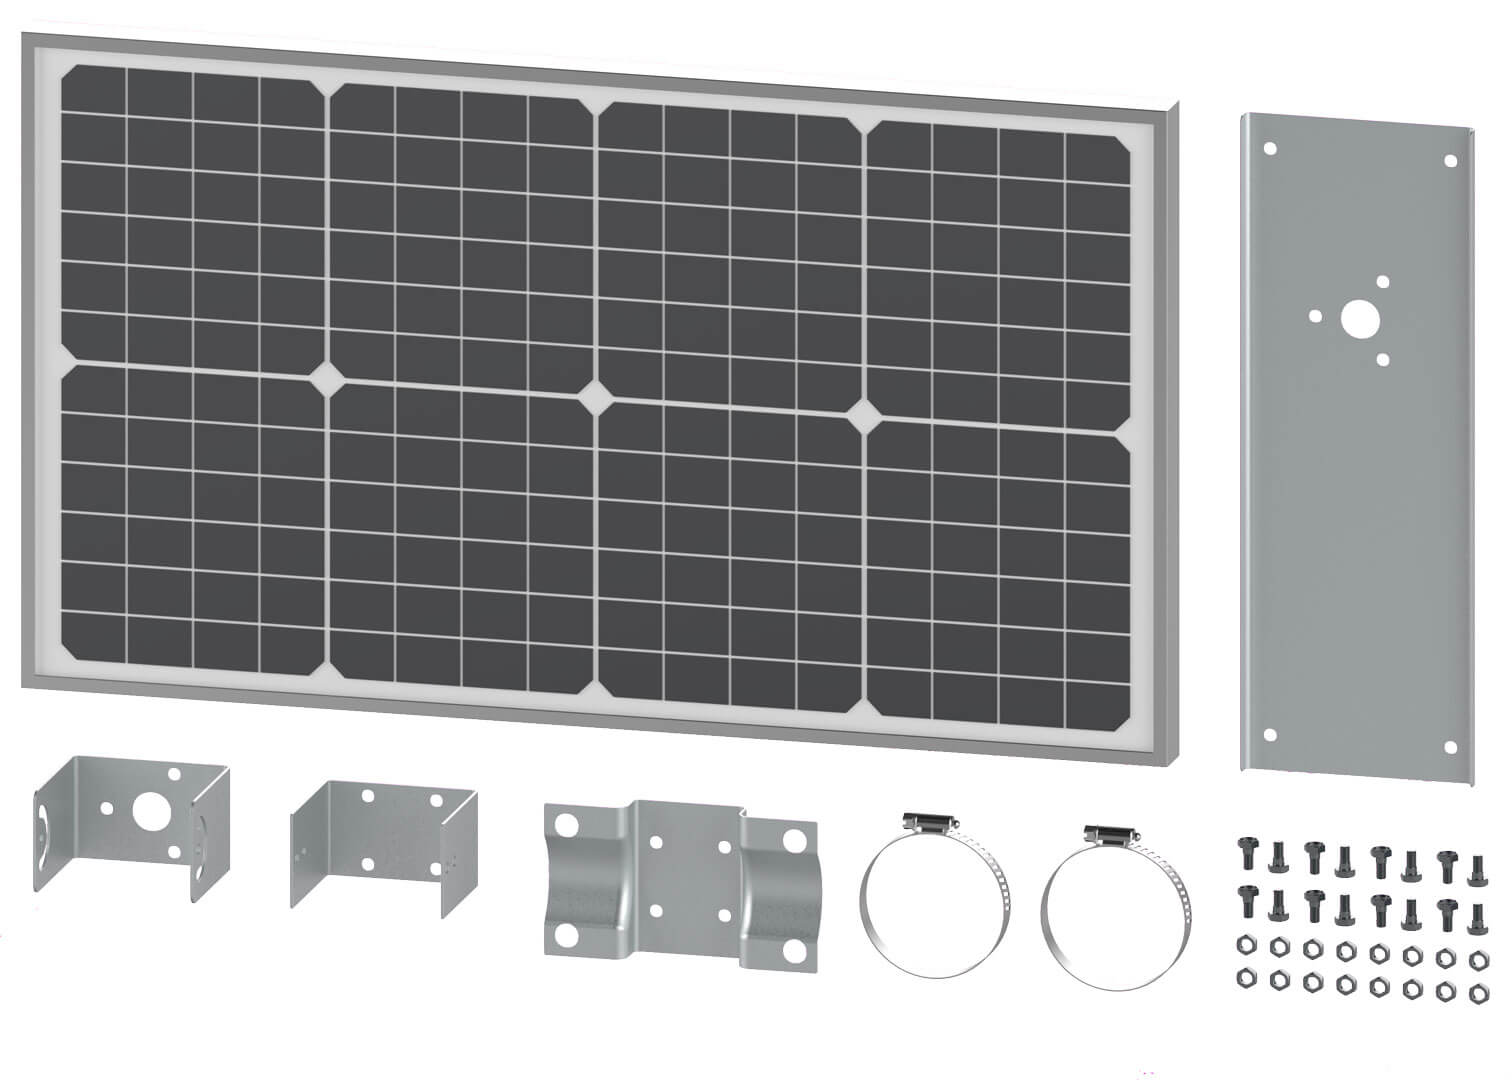 Illustration of parts and whats included in 30 Watt Monocrystalline Solar Panel Kit - AX30